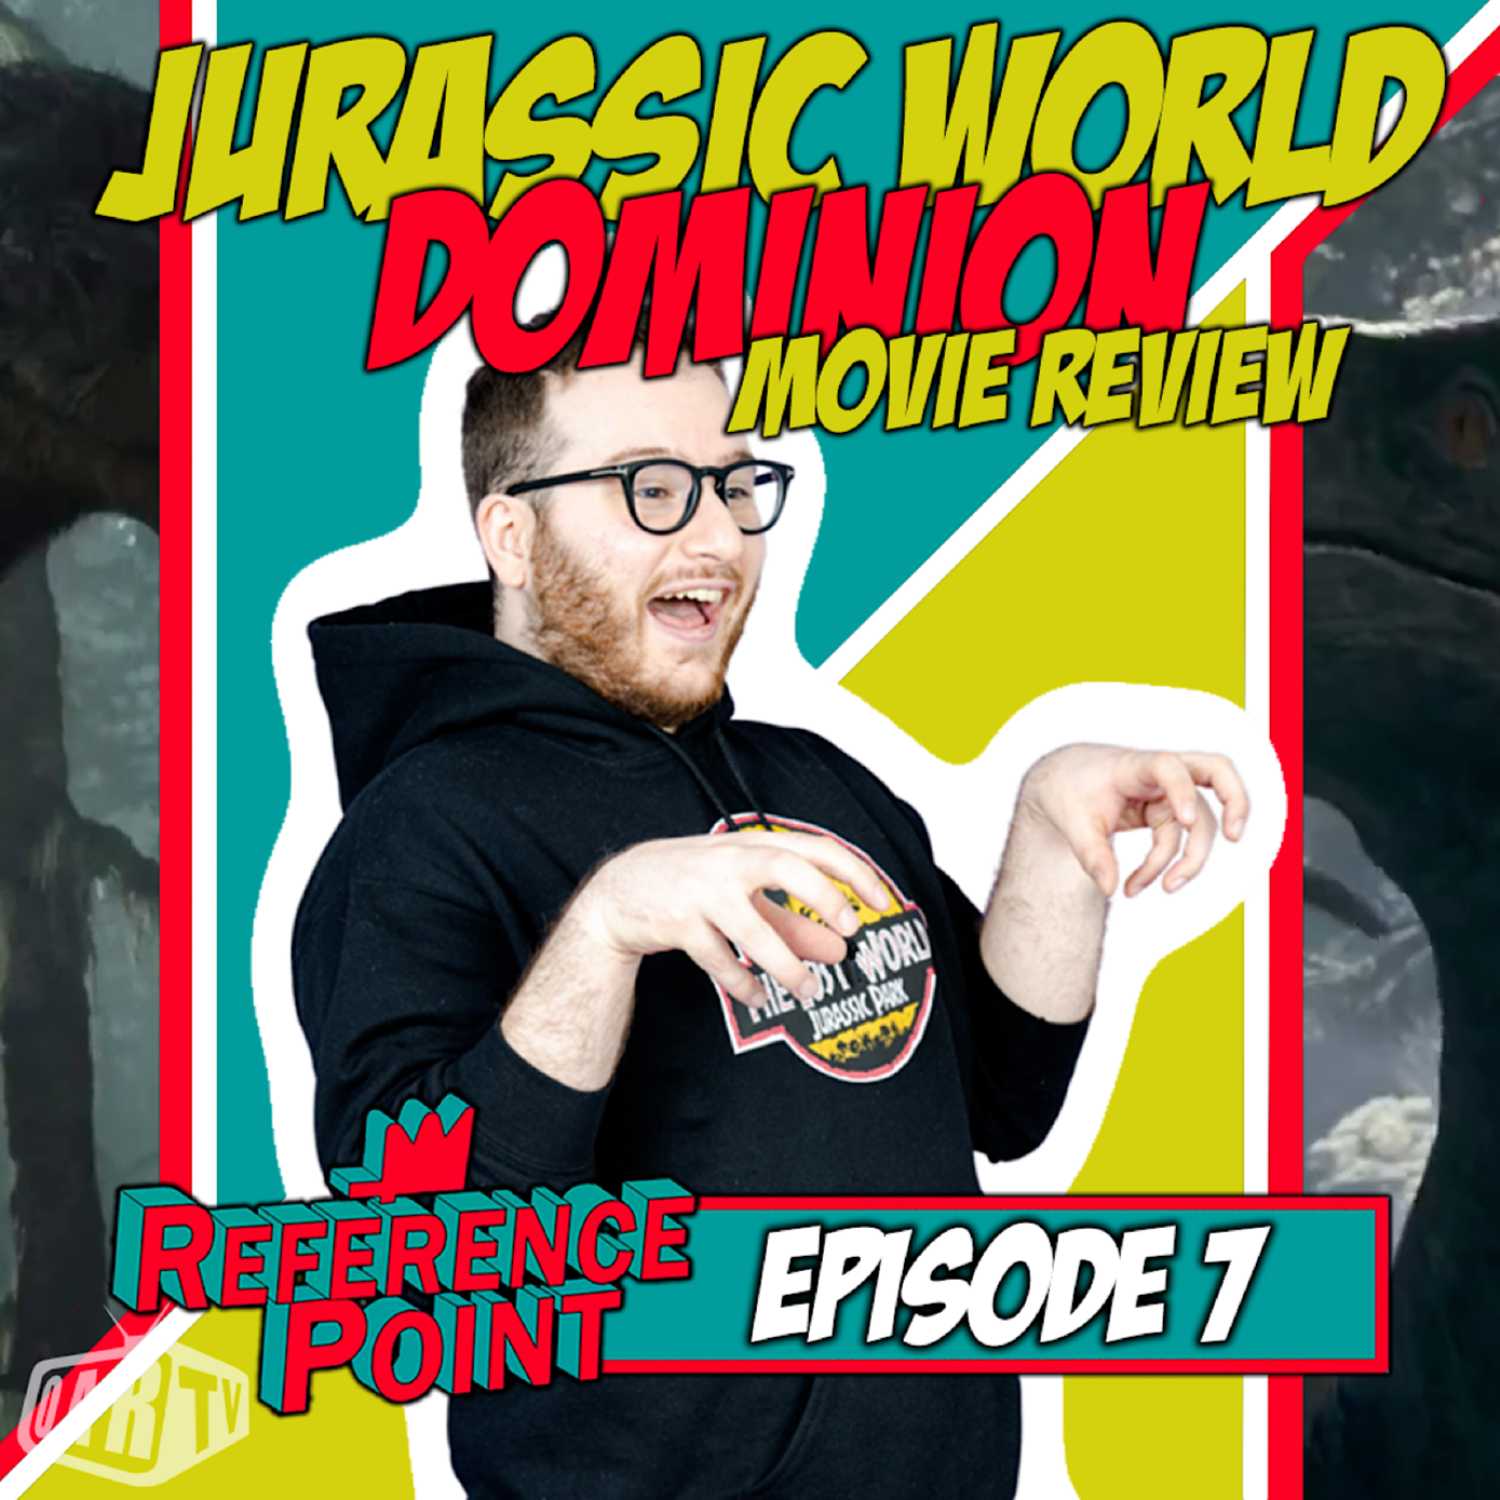 REFERENCE POINT - Episode 7 - JURASSIC WORLD: DOMINION Movie Review